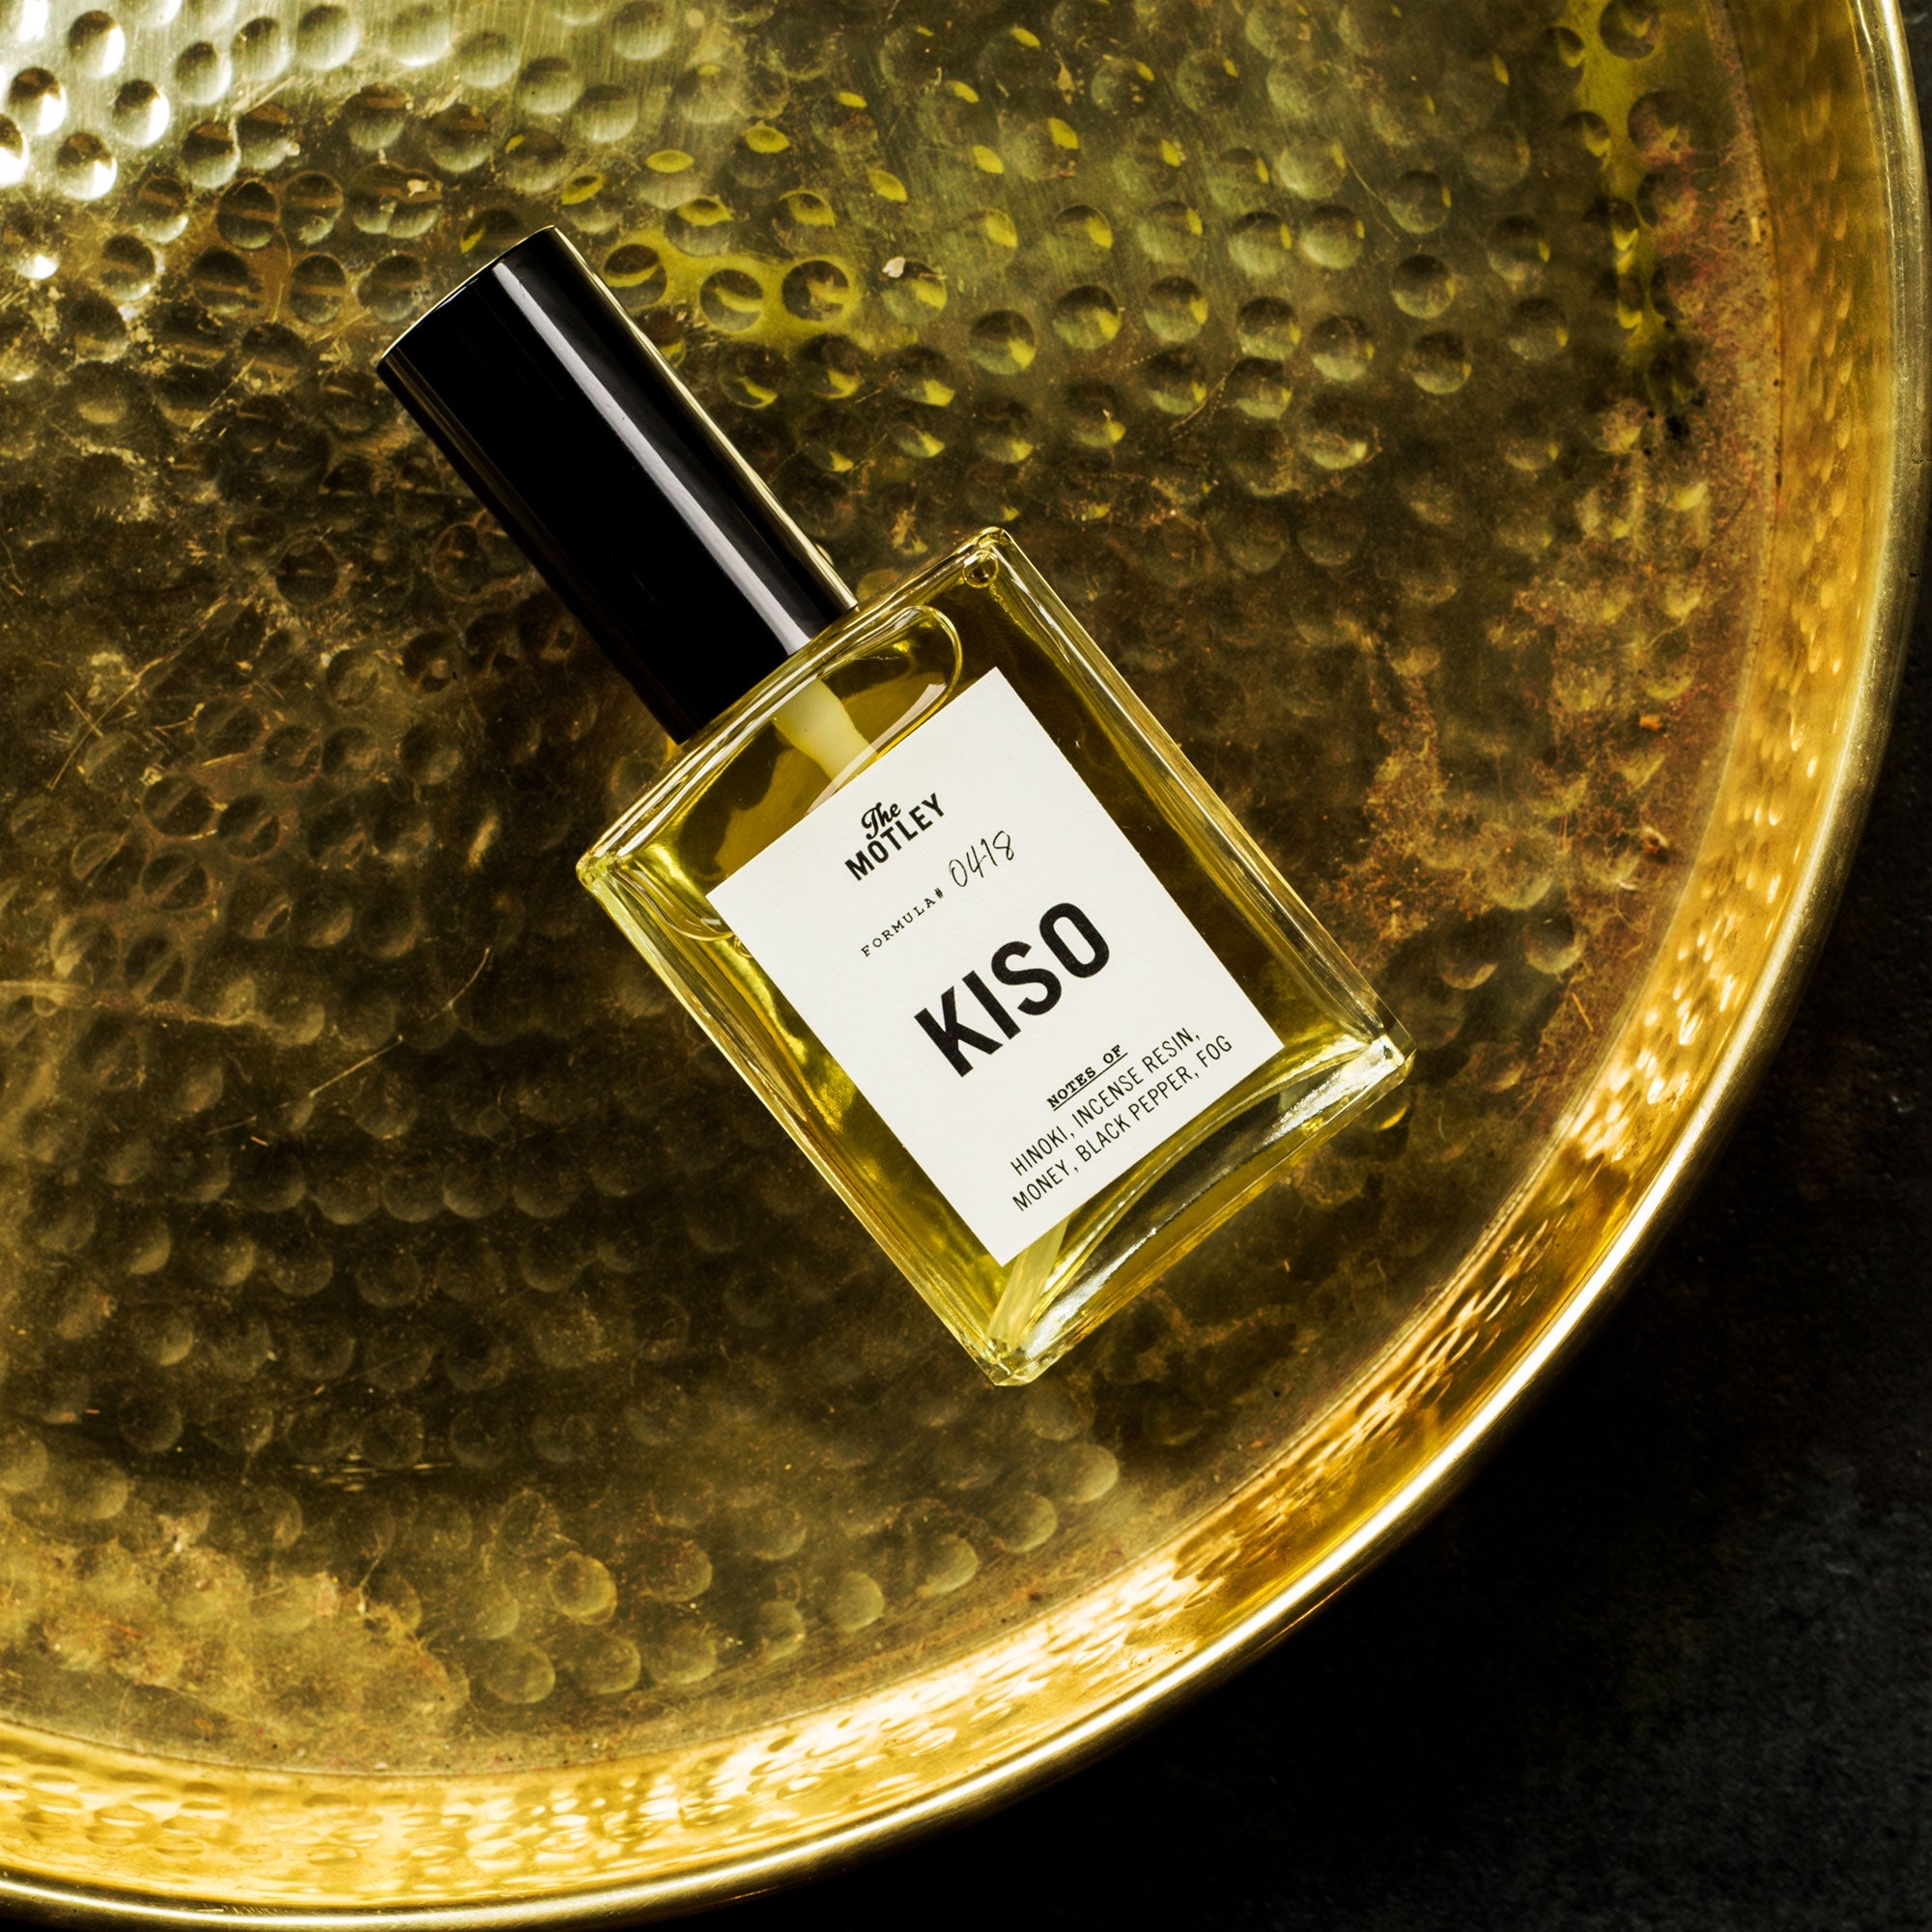 The Motley Kiso Fragrance in a glass bottle and a black pump cap rests on a gold platter.